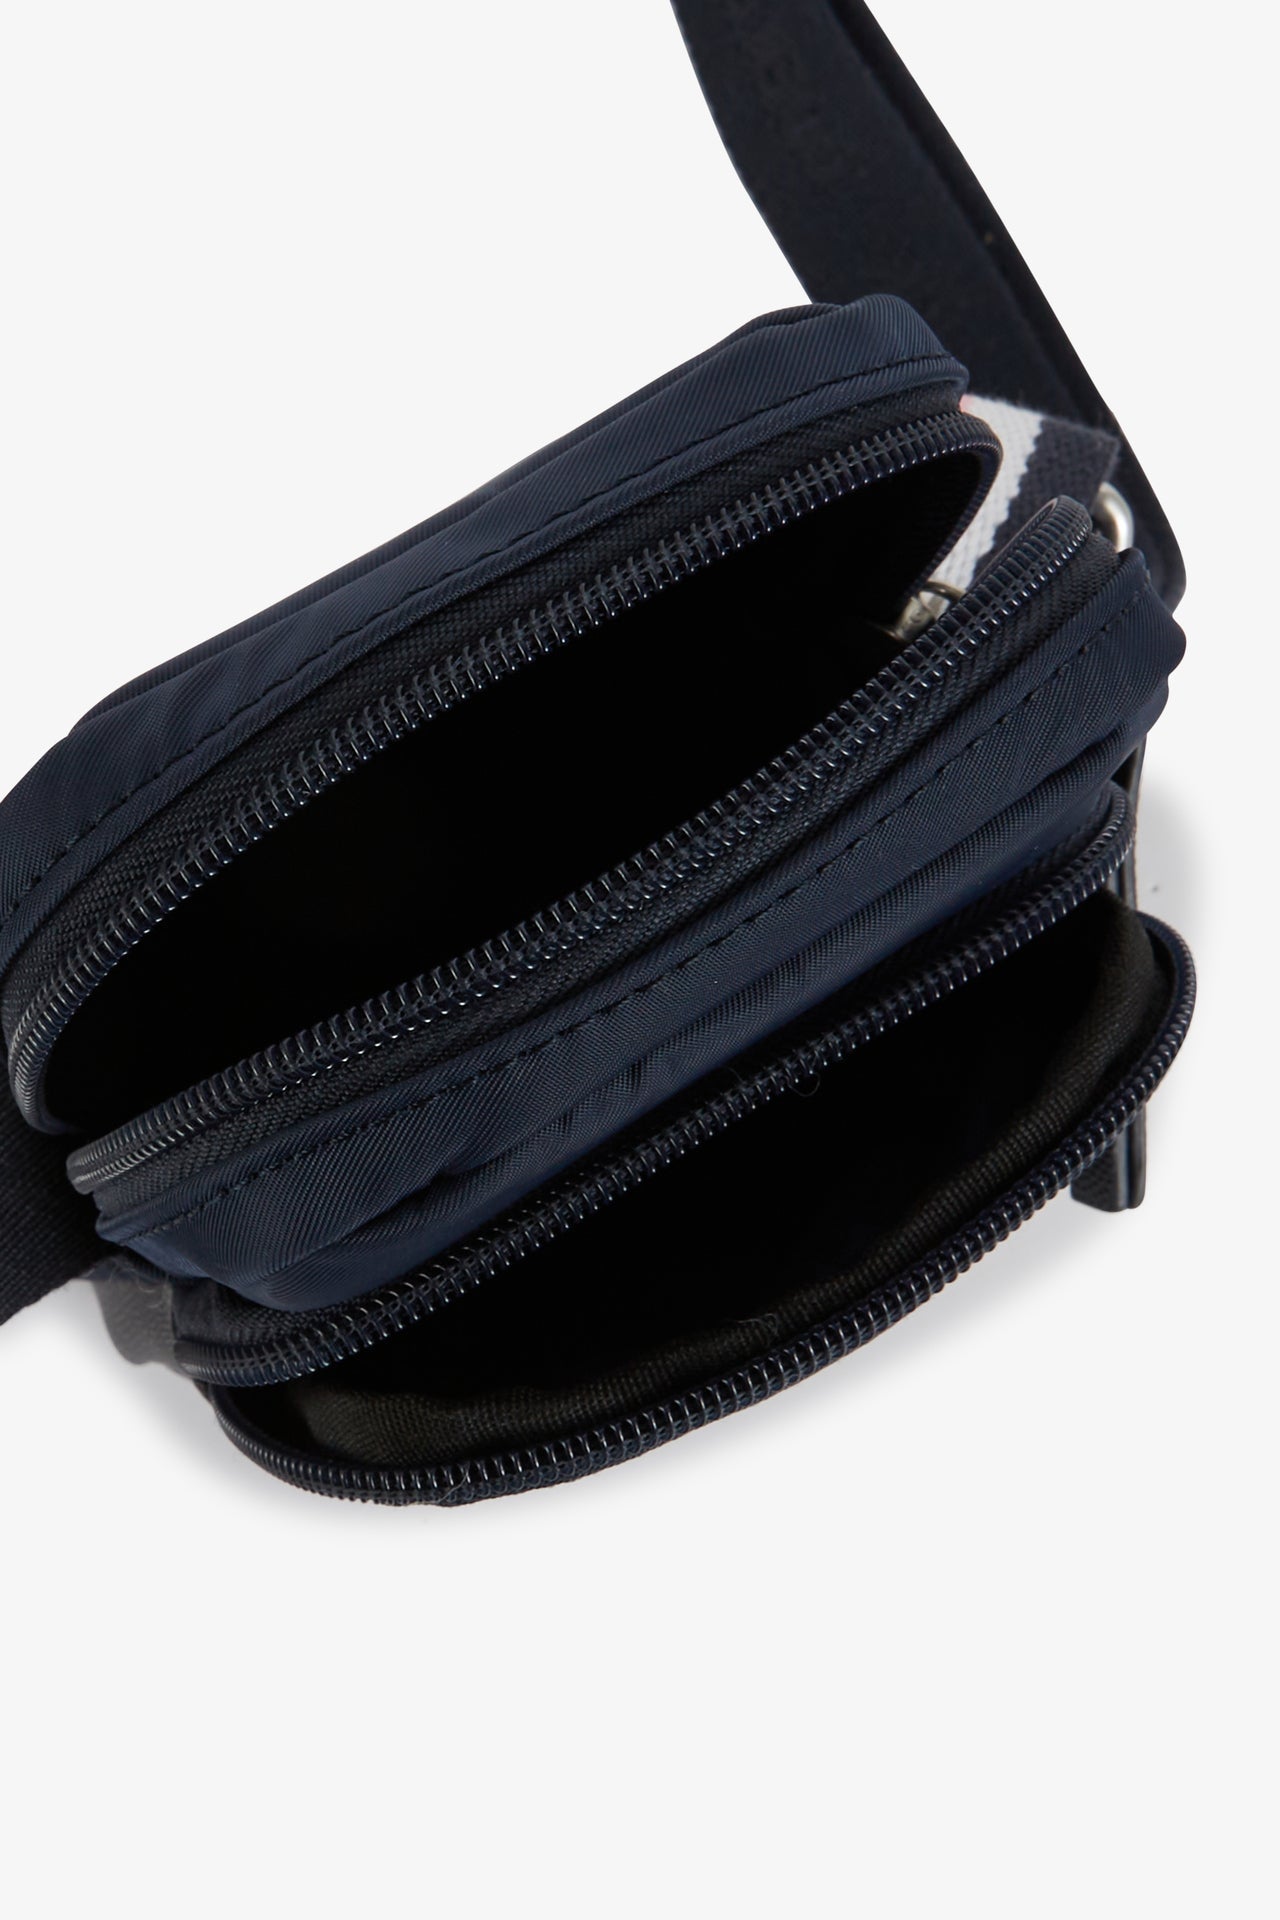 Navy blue satchel with grained leather effect - Image 5